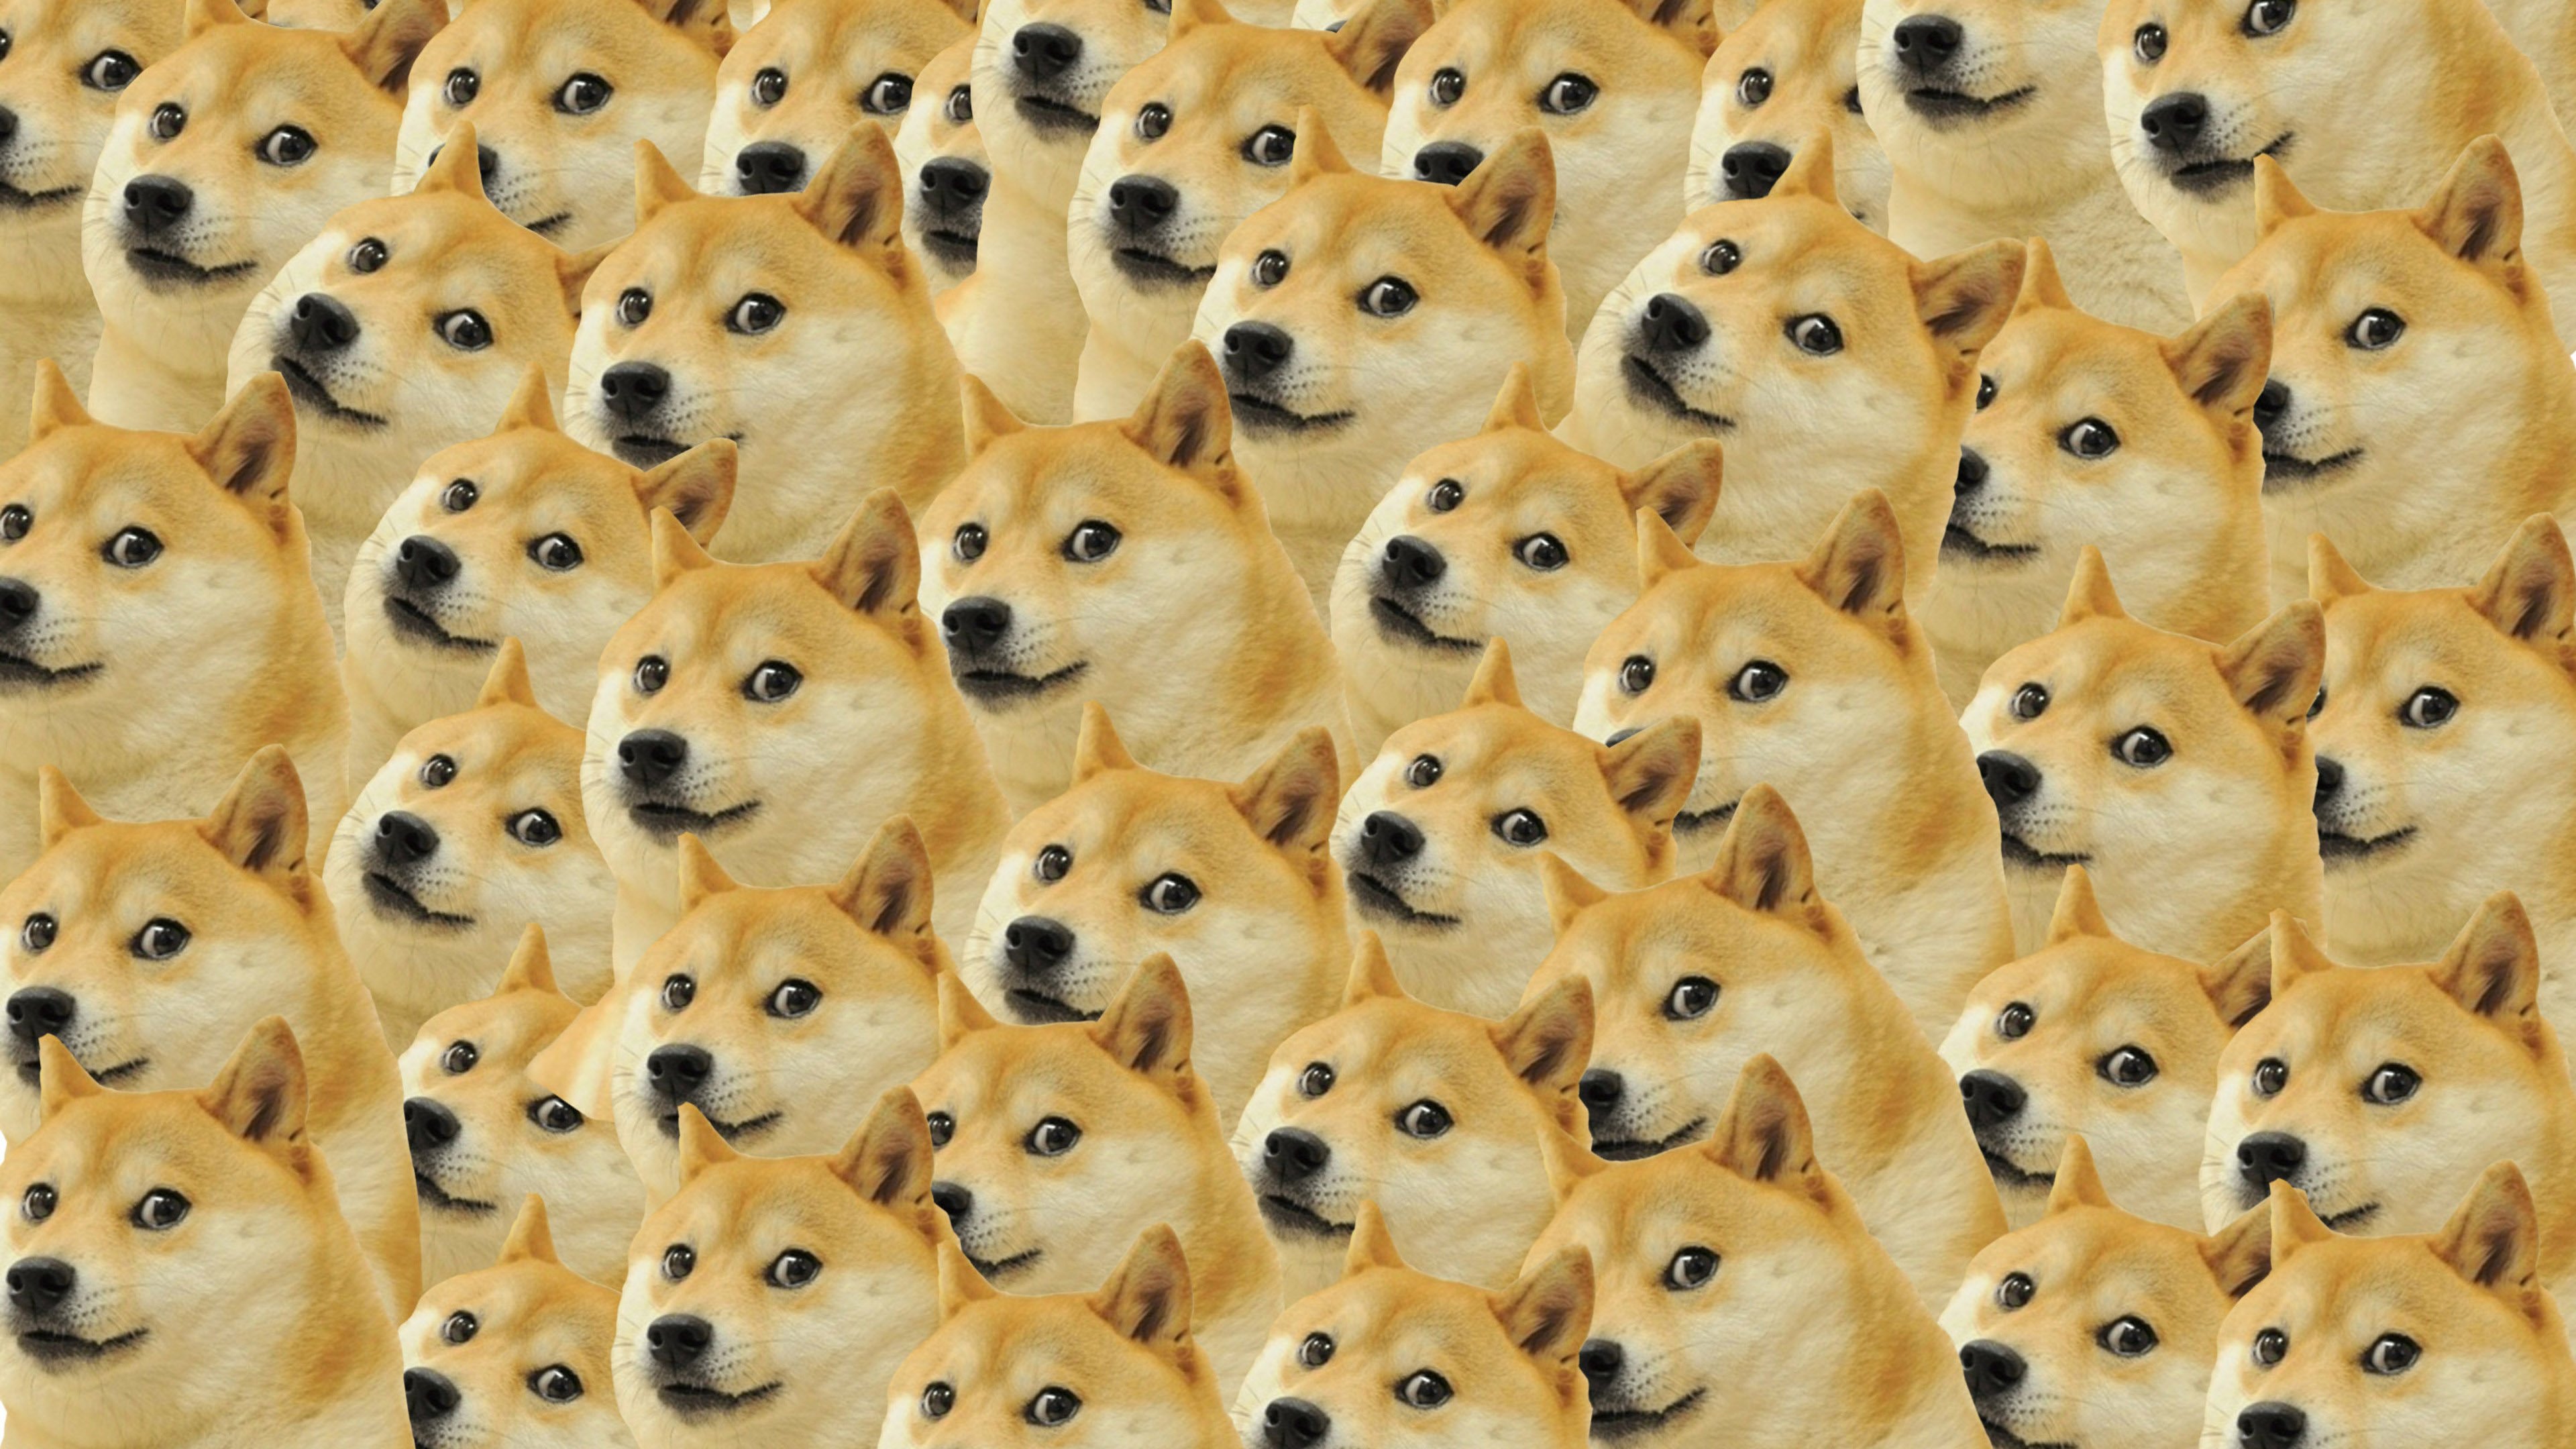 Doge Wallpaper Similar Results Search Results Doge Wallpaper